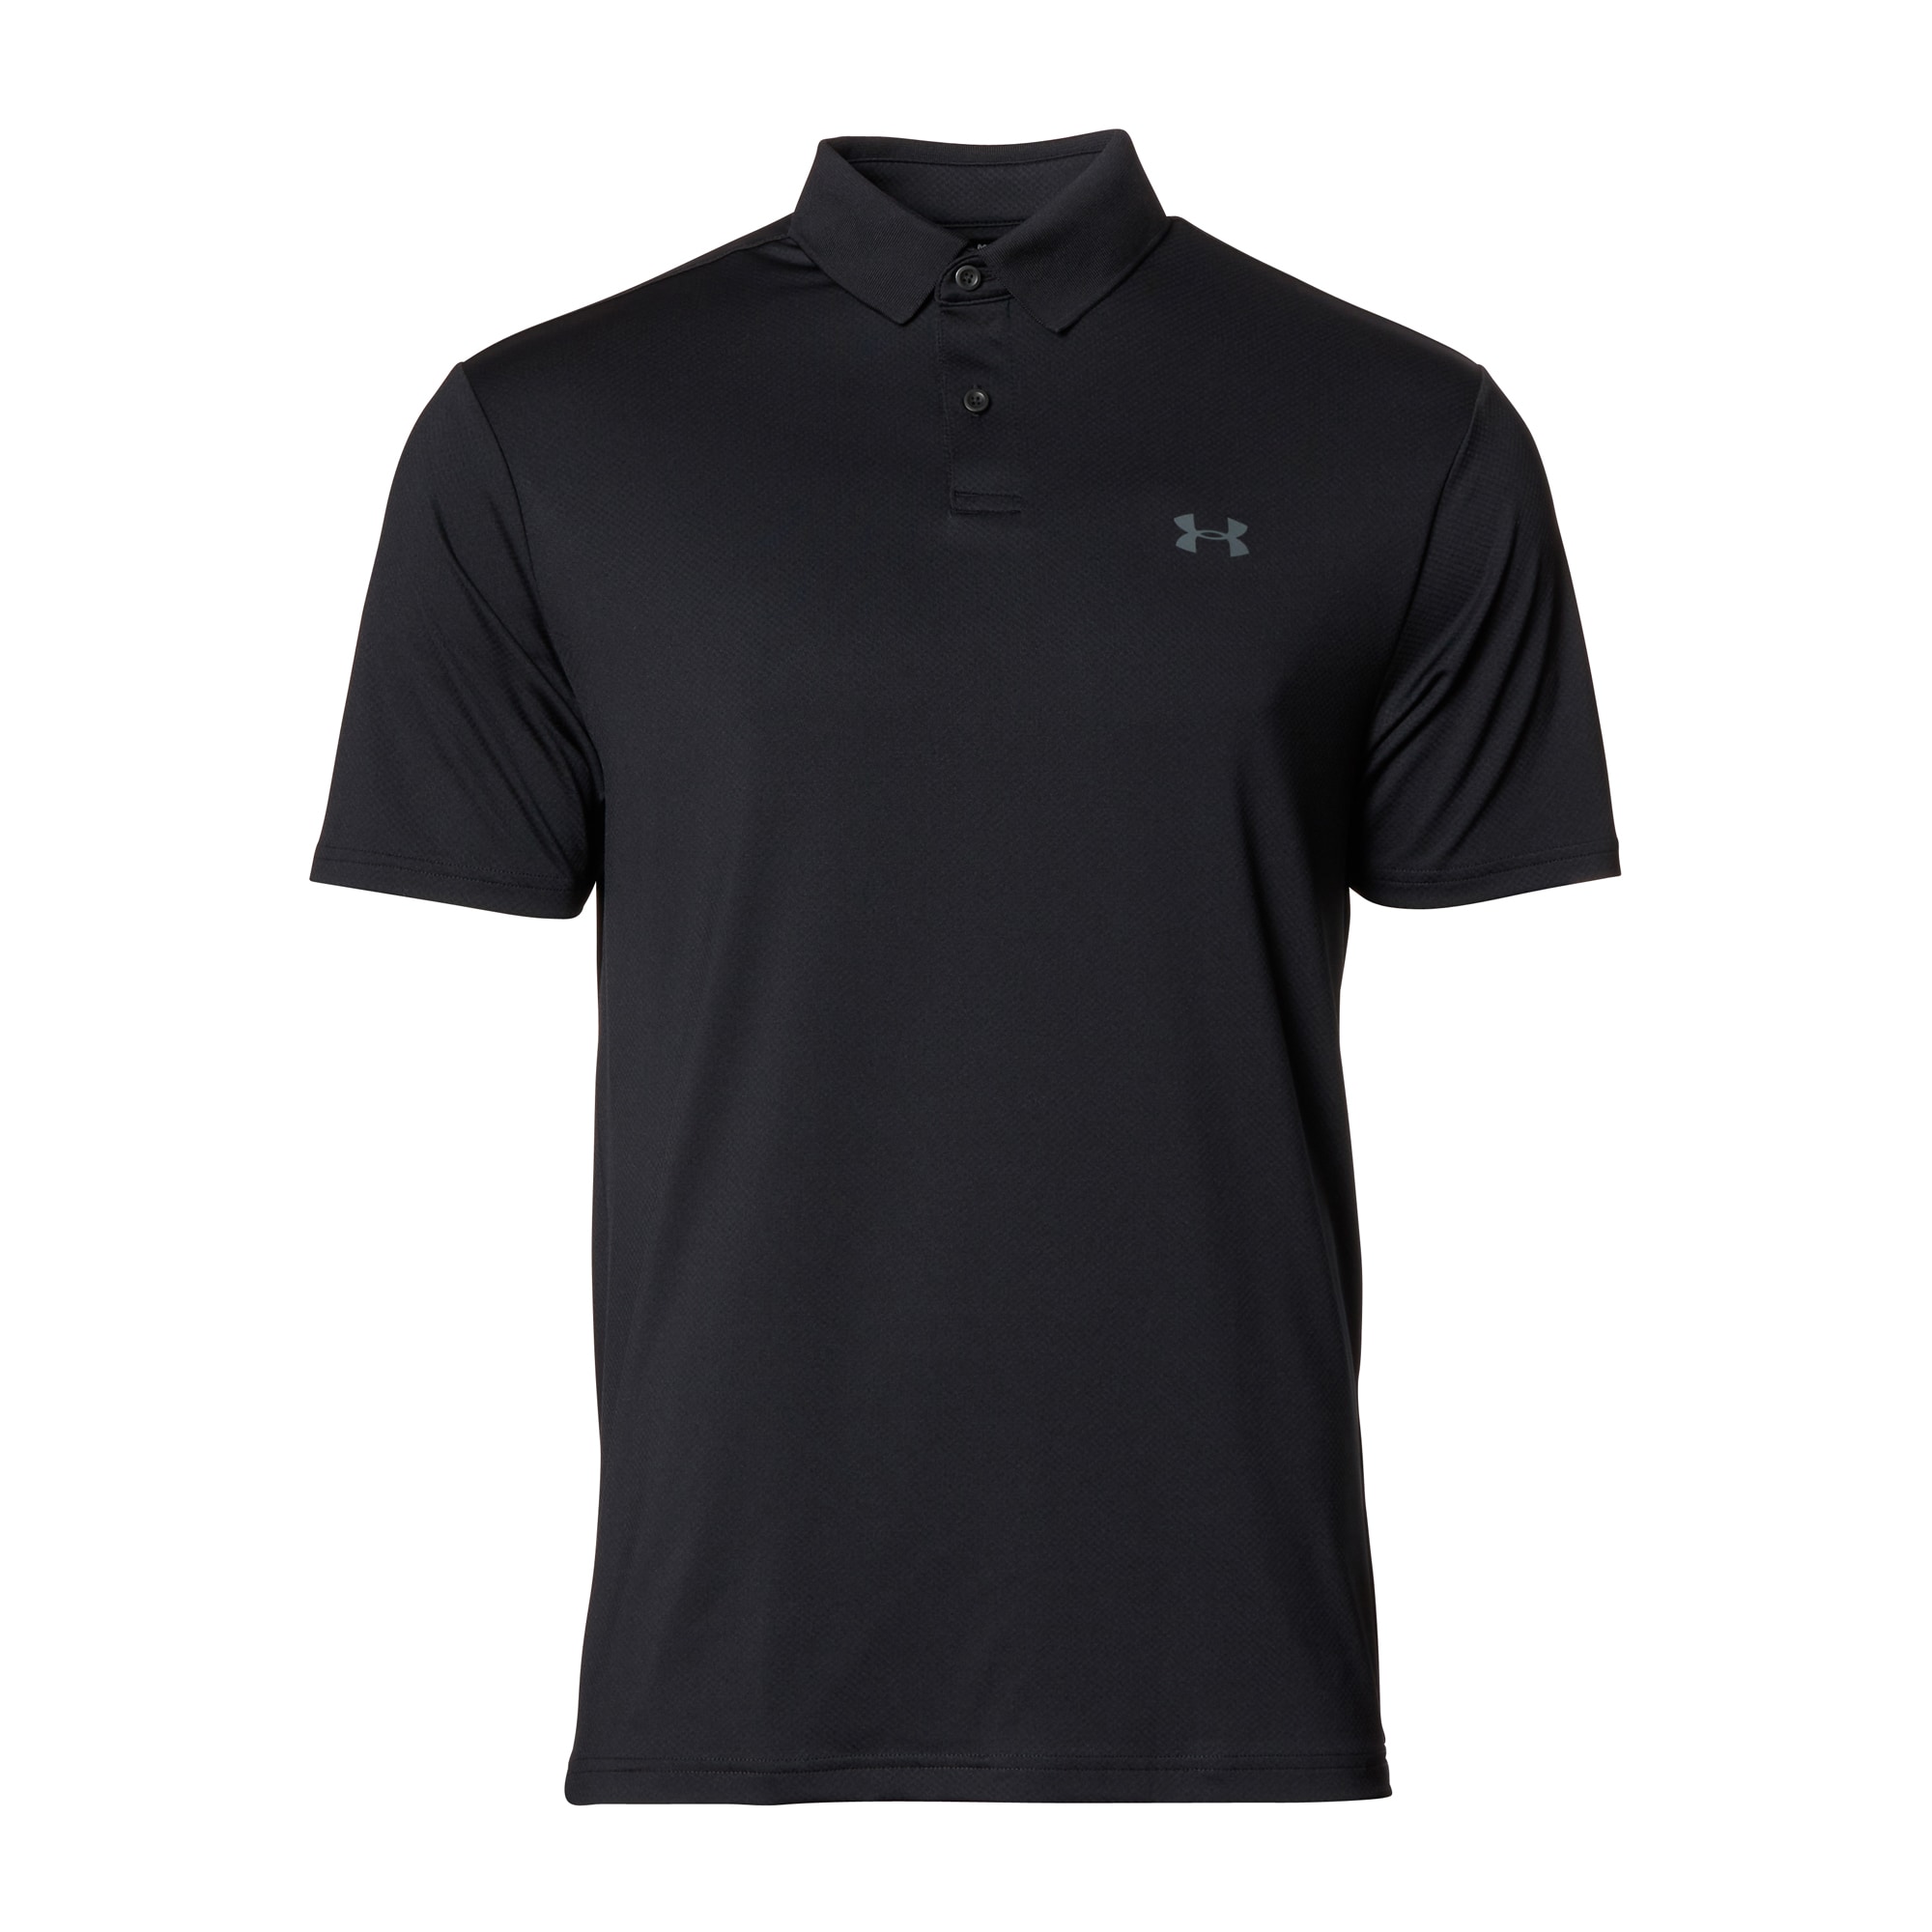 Purchase the Under Armour Polo Shirt Performance 2.0 2019 black